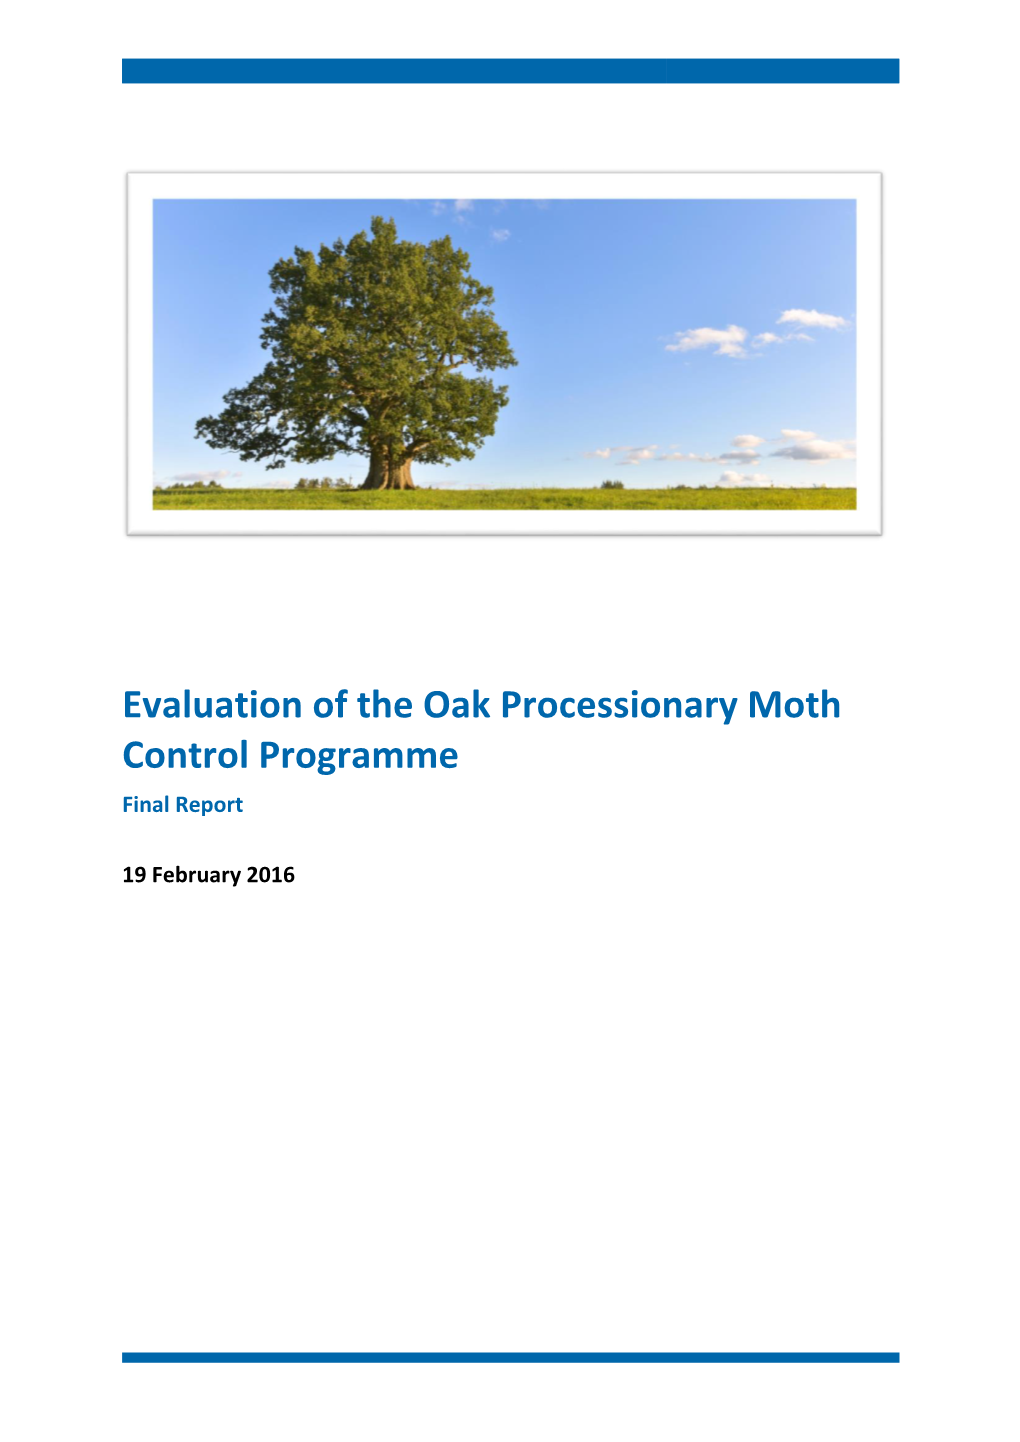 Evaluation of the Oak Processionary Moth Control Programme Final Report